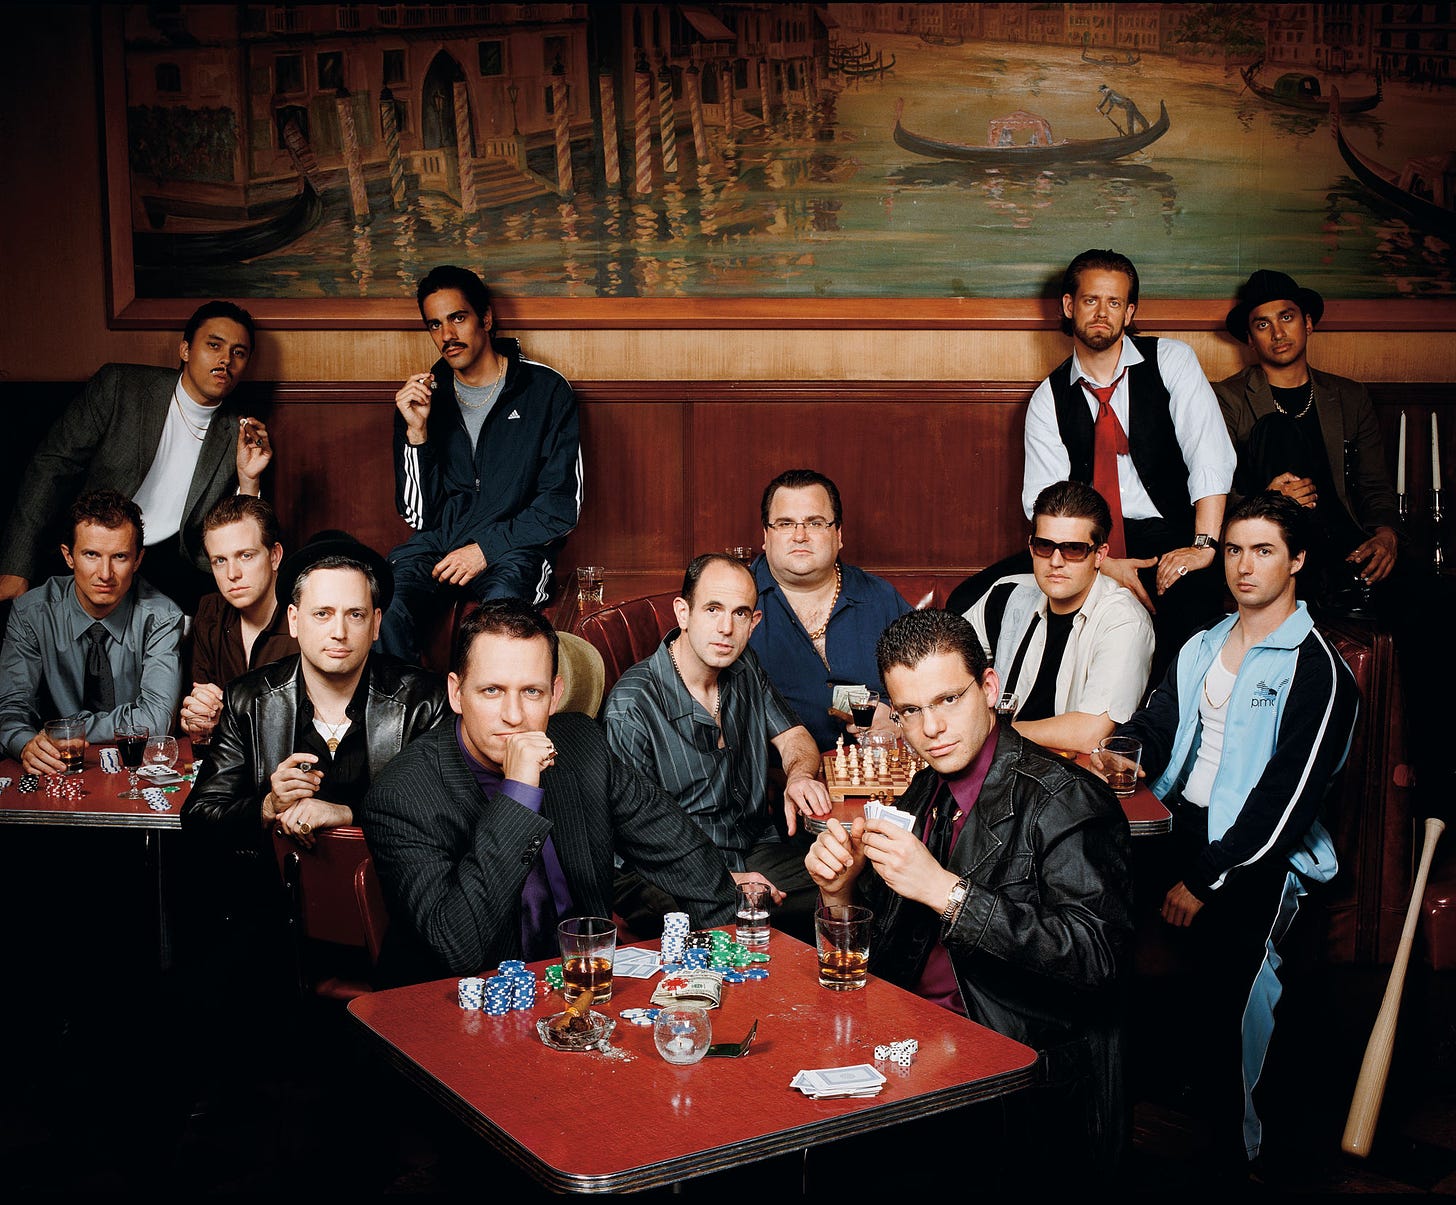 The &quot;paypal mafia&quot; photographed at Tosca in San Francisco, Oct, 2007.Back row from left: Jawed Karim, co-founder Youtube; Jeremy Stoppelman CEO Yelp; Andrew McCormack, managing partner Laiola Restaurant; Premal Shah, Pres of Kiva; 2nd row from left: Luke Nosek, managing partner The Founders Fund; Kenny Howery, managing partner The Founders Fund; David Sacks, CEO Geni and Room 9 Entertainment; Peter Thiel, CEO Clarium Capital and Founders Fund; Keith Rabois, VP BIz Dev at Slide and original Youtube Investor; Reid Hoffman, Founder Linkedin; Max Levchin, CEO Slide; Roelof Botha, partner Sequoia Capital; Russel Simmons, CTO and co-founder of Yelp